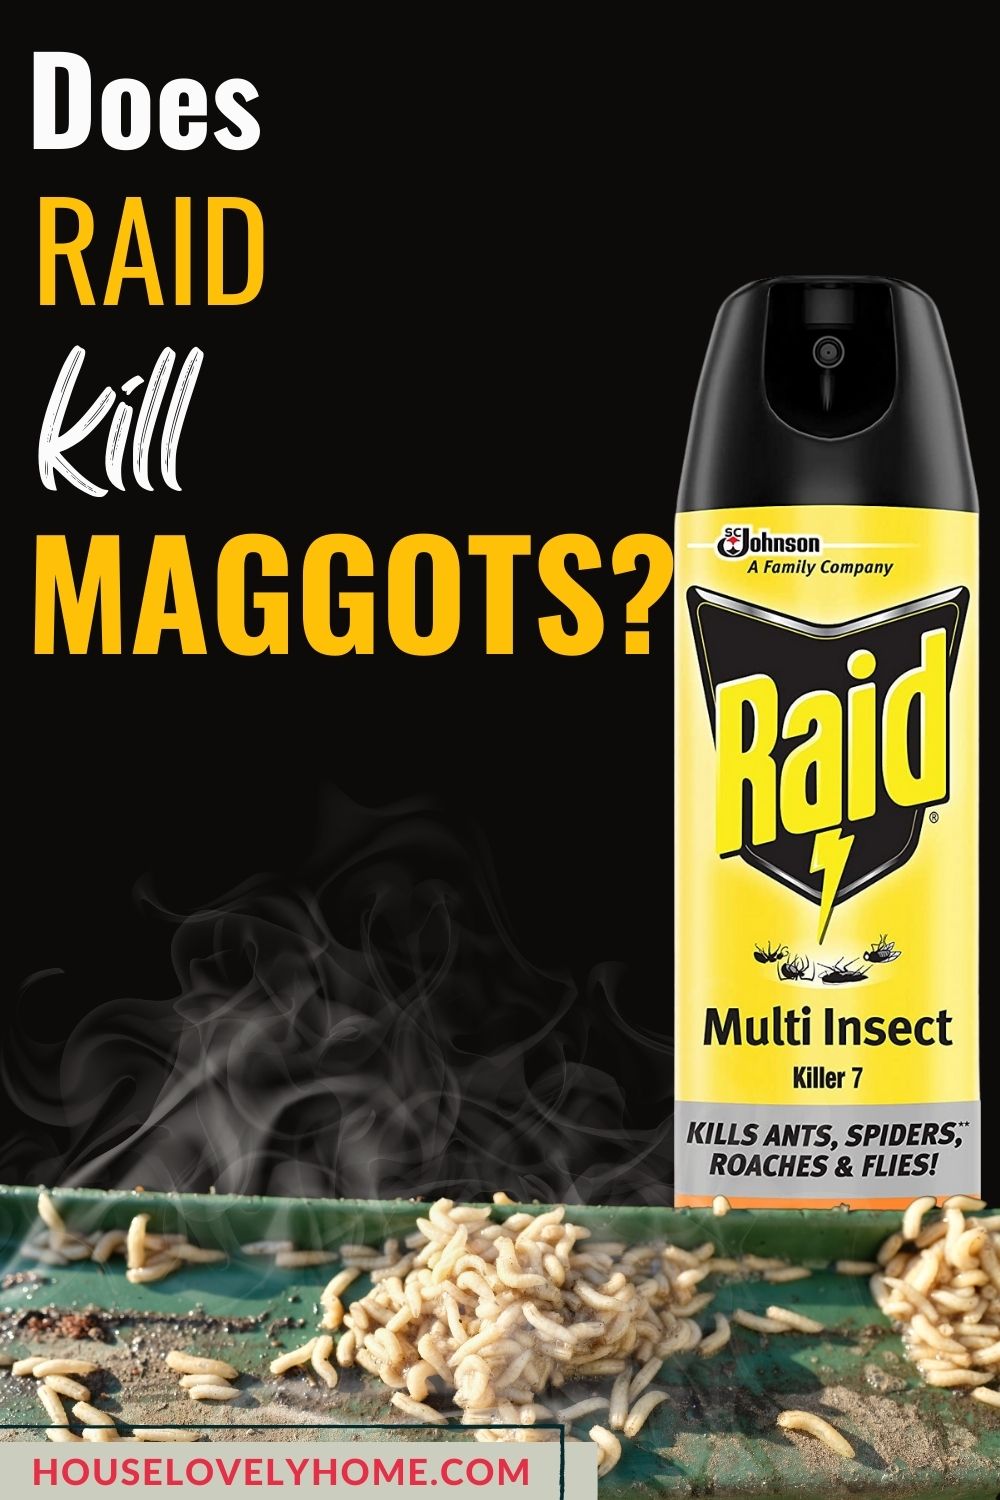 Image showing maggots on green wooden board, a Raid Insecticide and text overlays that read does raid kill maggots